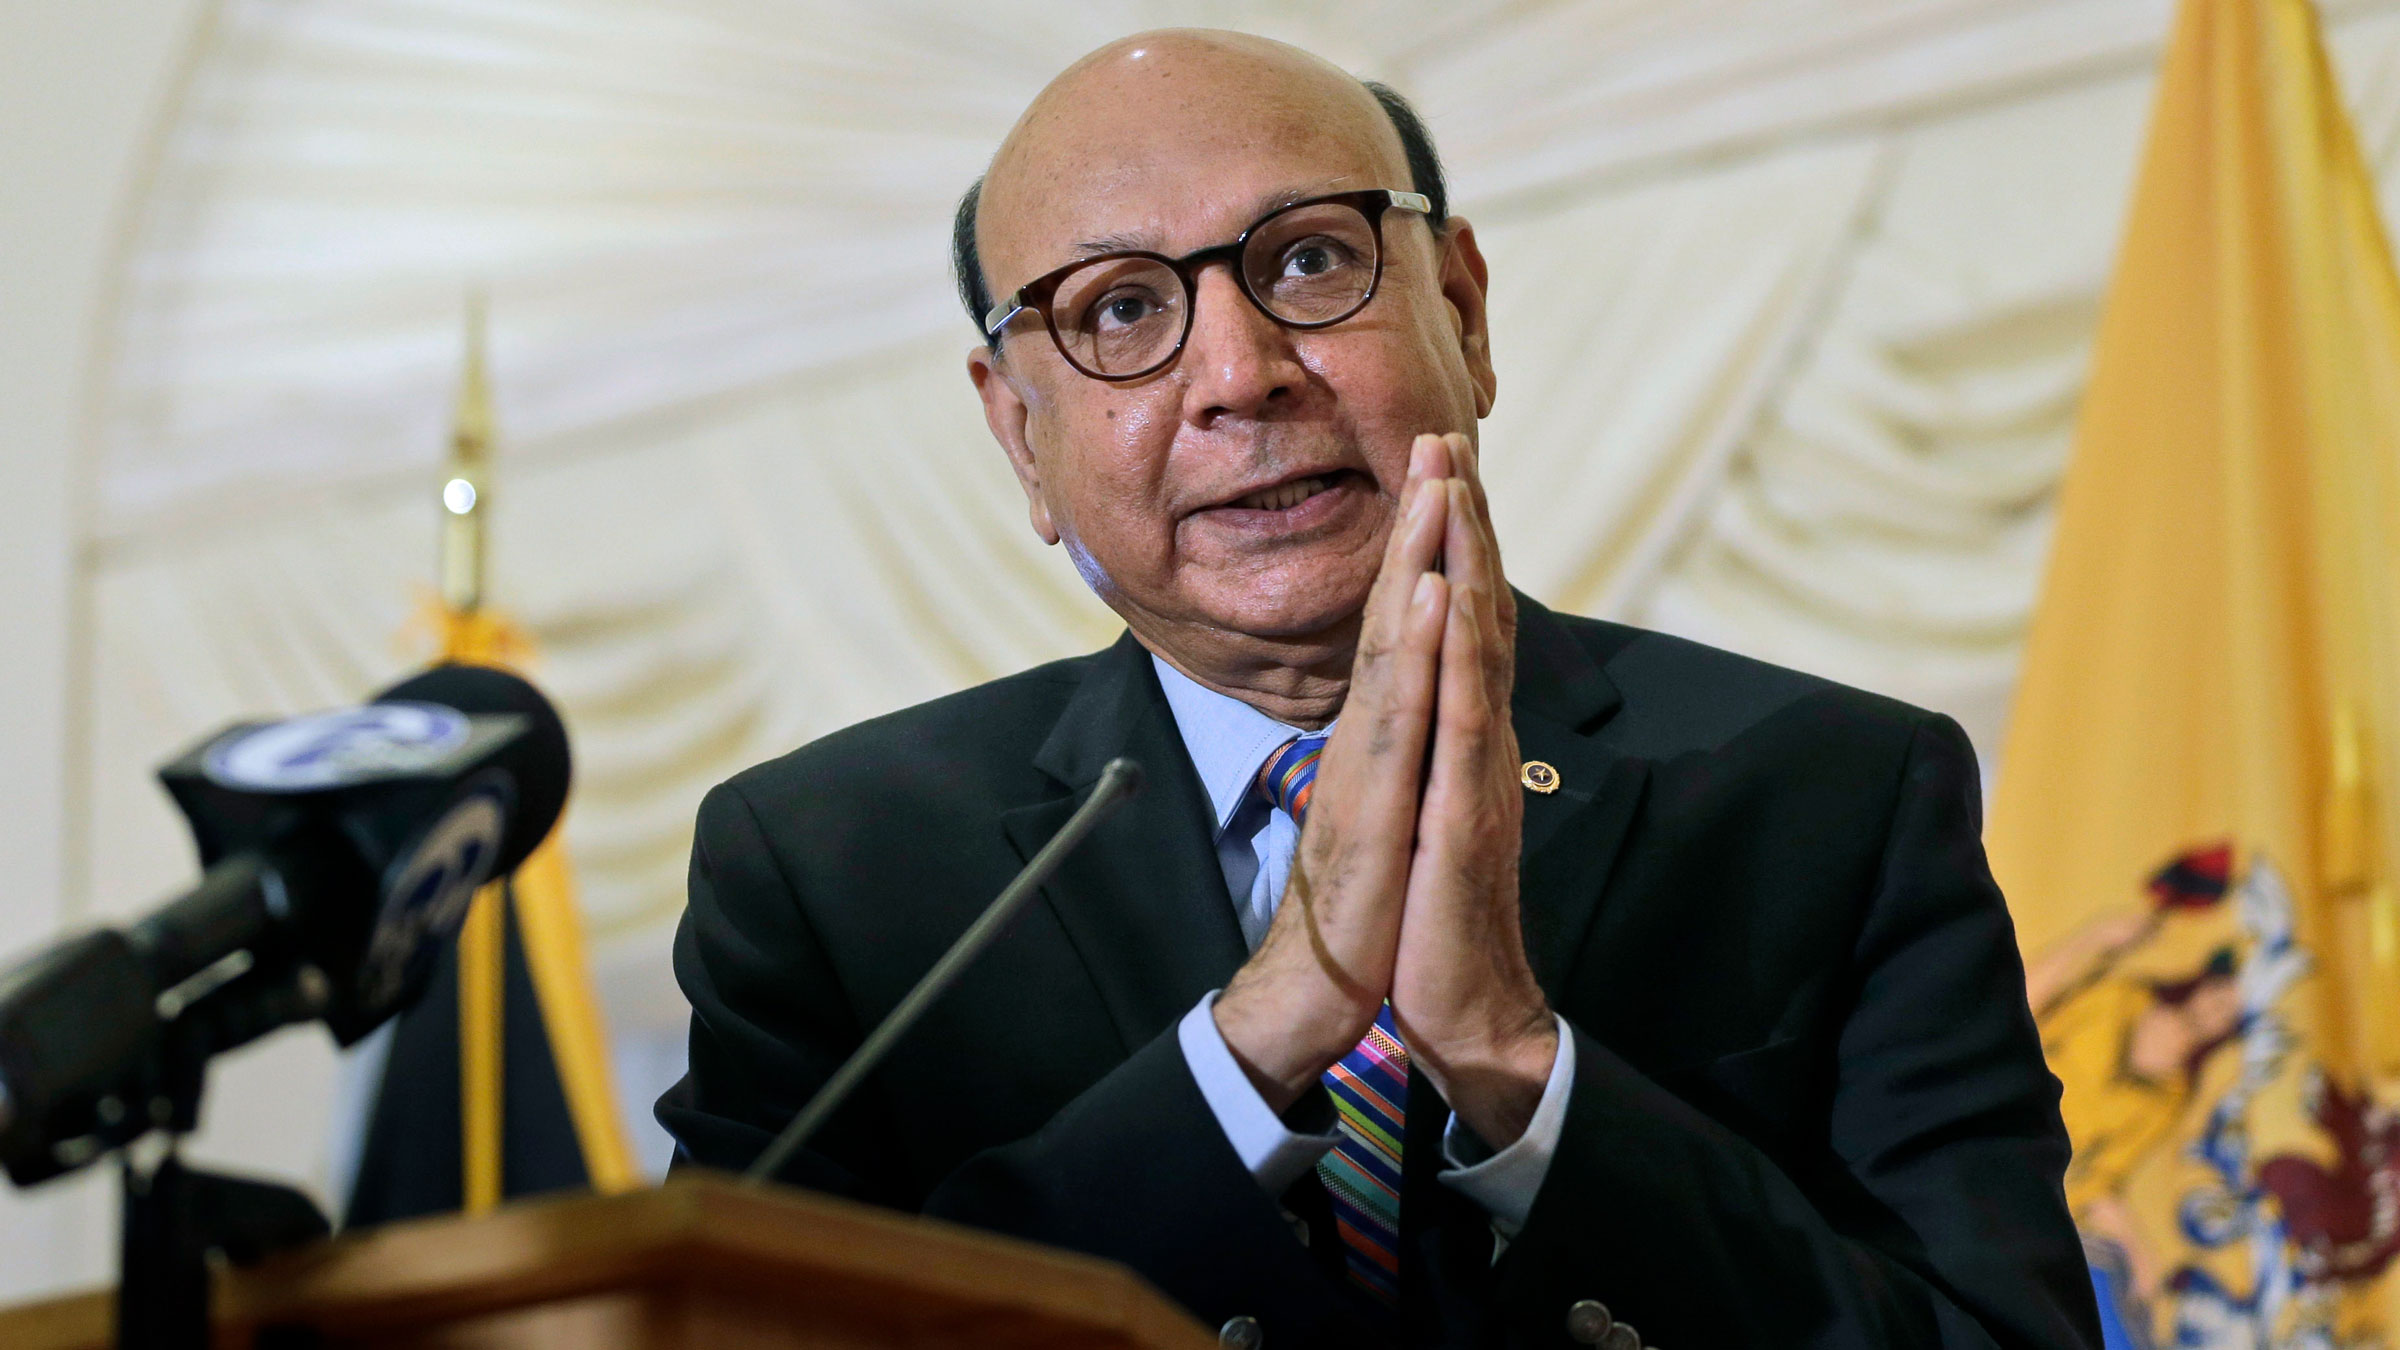 Khizr Khan speaks at an event in Collingswood, New Jersey, in 2017.